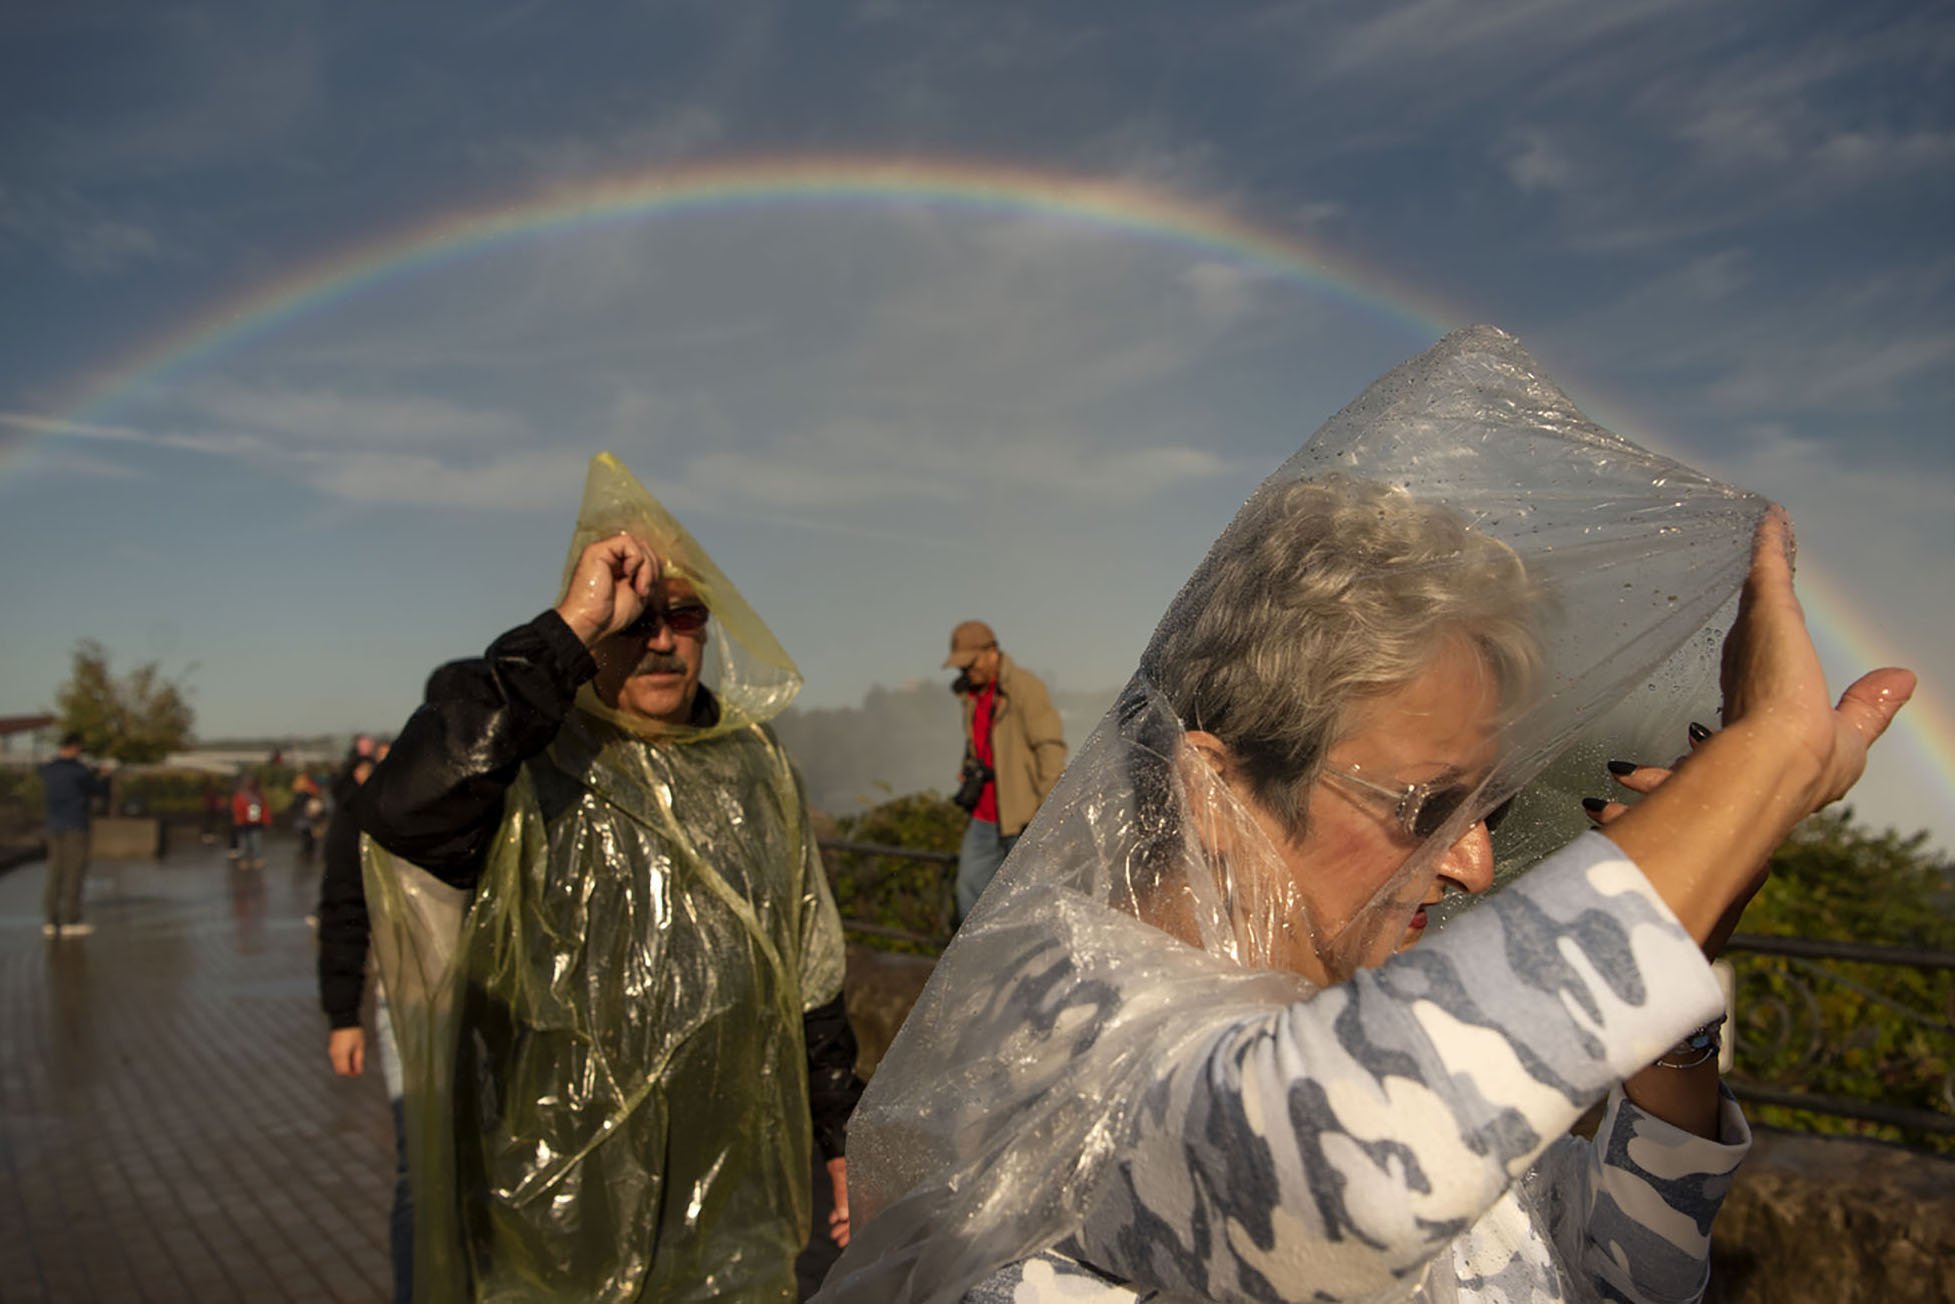  Tourists scope out Niagara Falls in Ontario, Canada on Thursday, Oct. 10. 